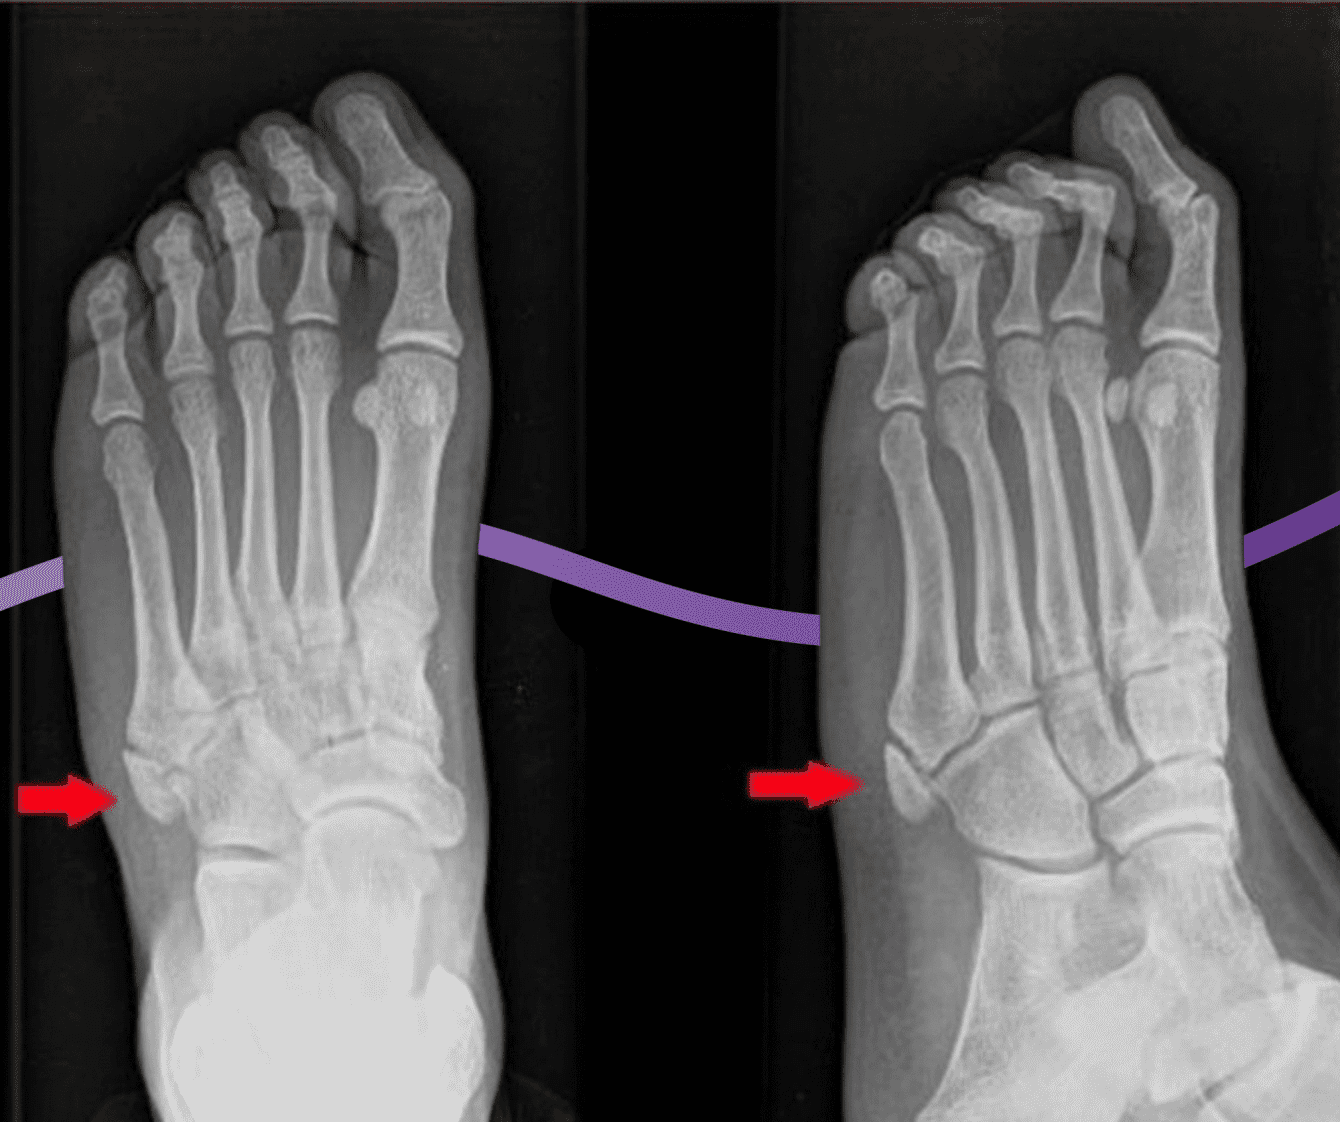 A side view of a foot with a hand holding the ankle. The ankle is highlighted red signifying pain